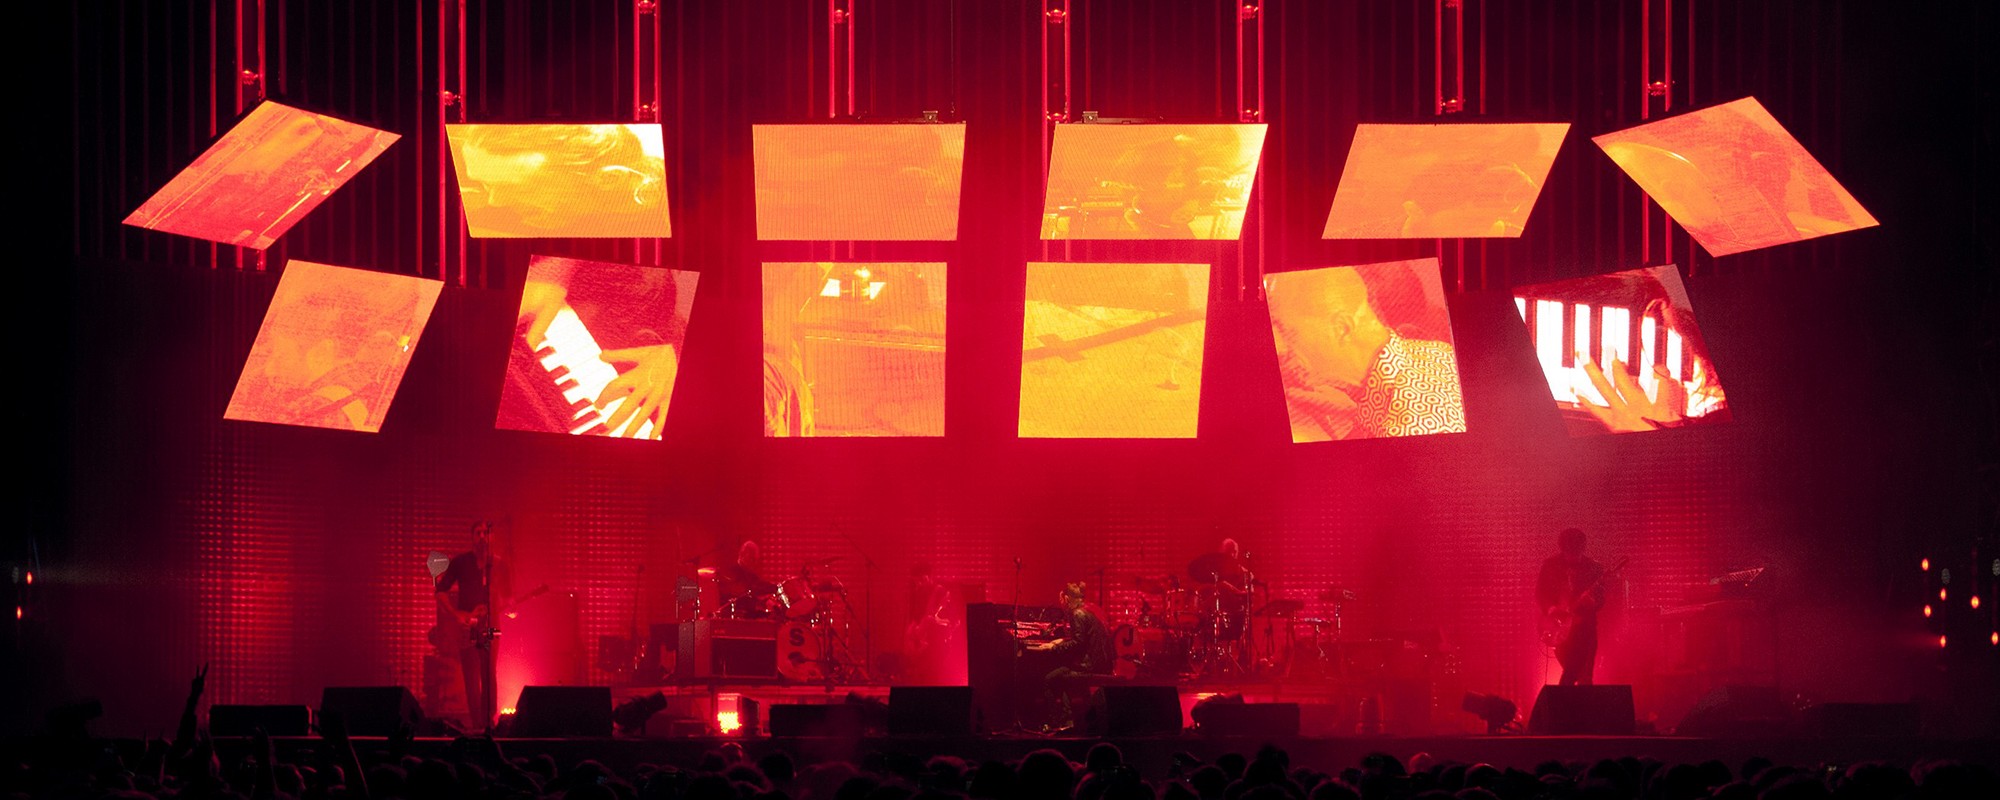 The band Radiohead performs on a stage at a gig.